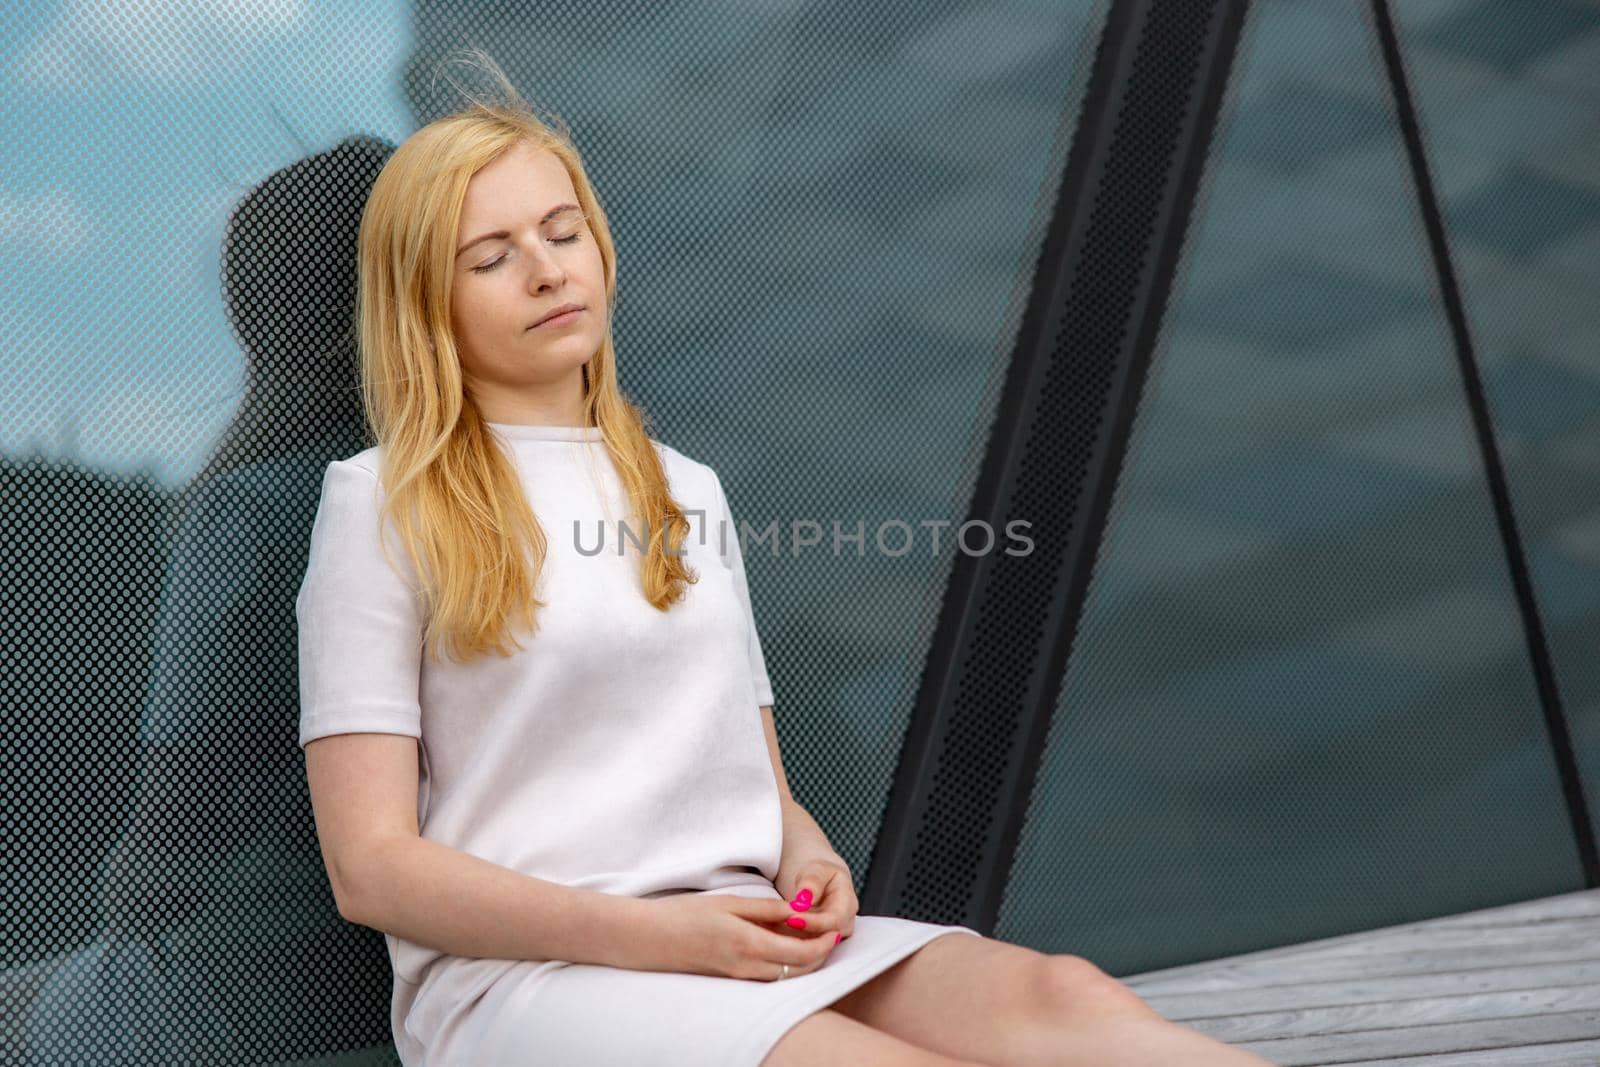 Young beautiful blond woman sitting outdoors, on the wooden terrace in the city and resting. Girl has break, spending time outside and relaxing. Time with yourself, dreaming, relaxation, mental health by creativebird